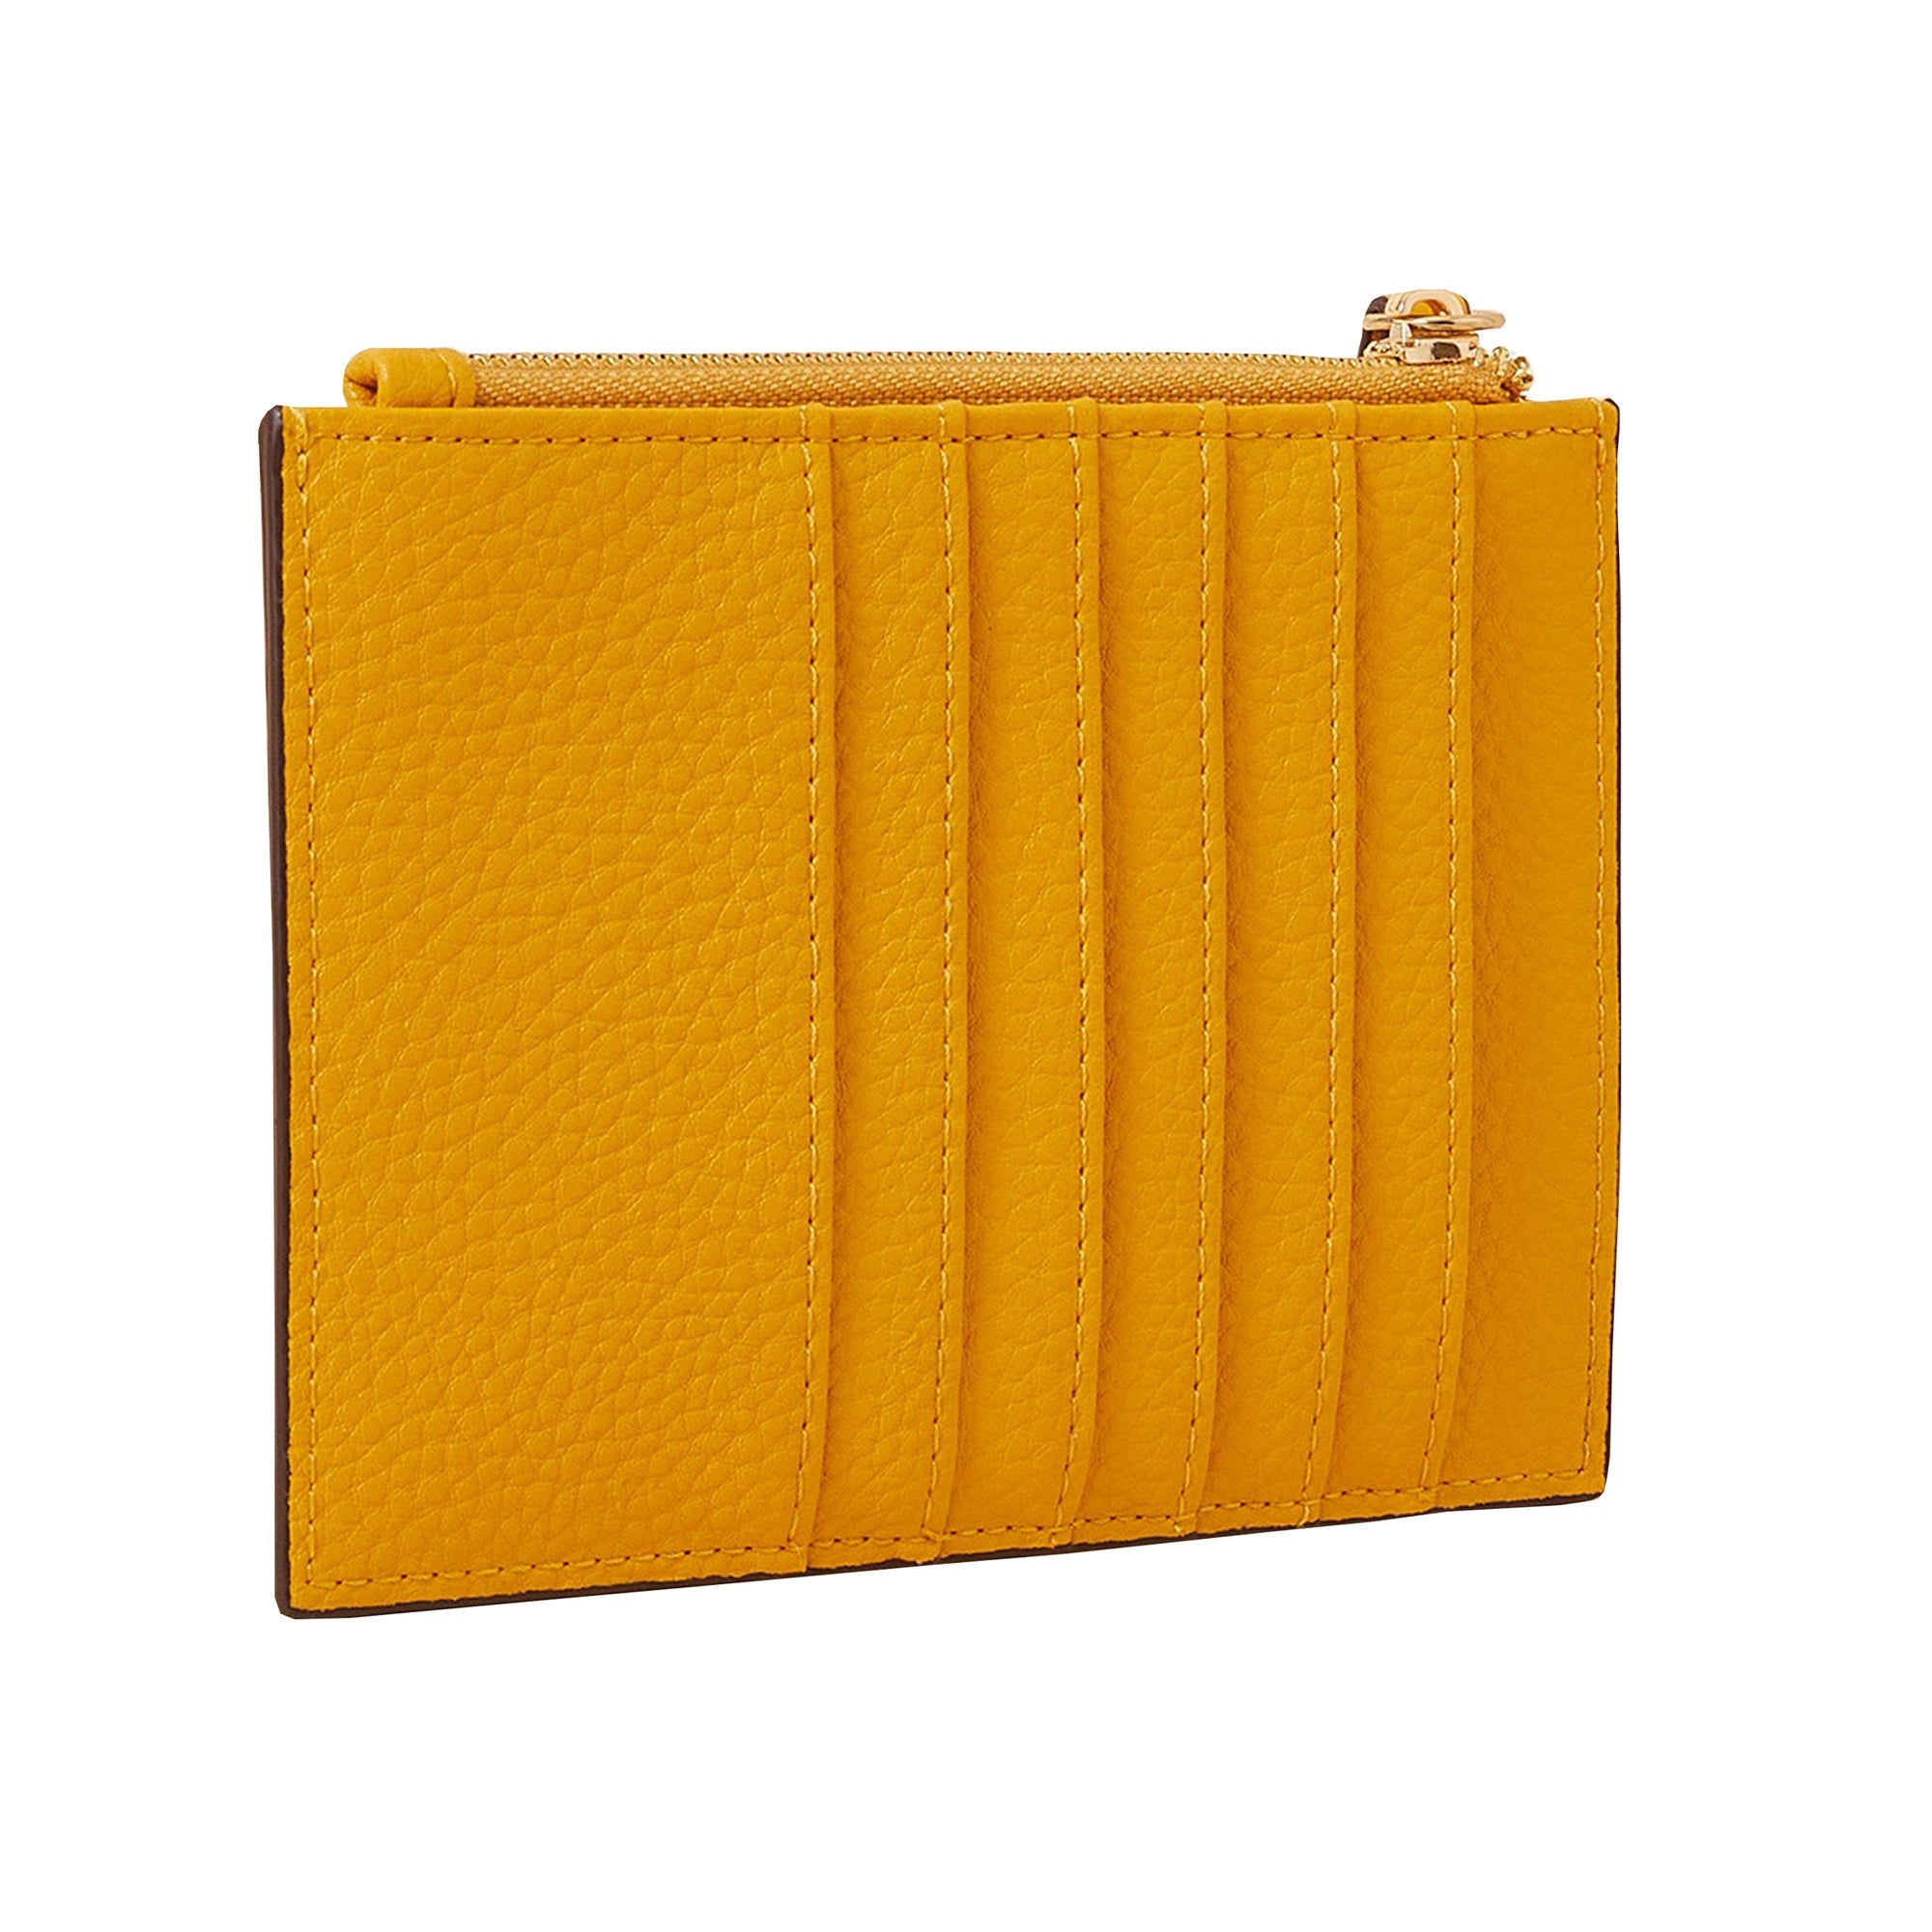 Accessorize London Women'S Faux Leather Yellow Large Functional Cardholder